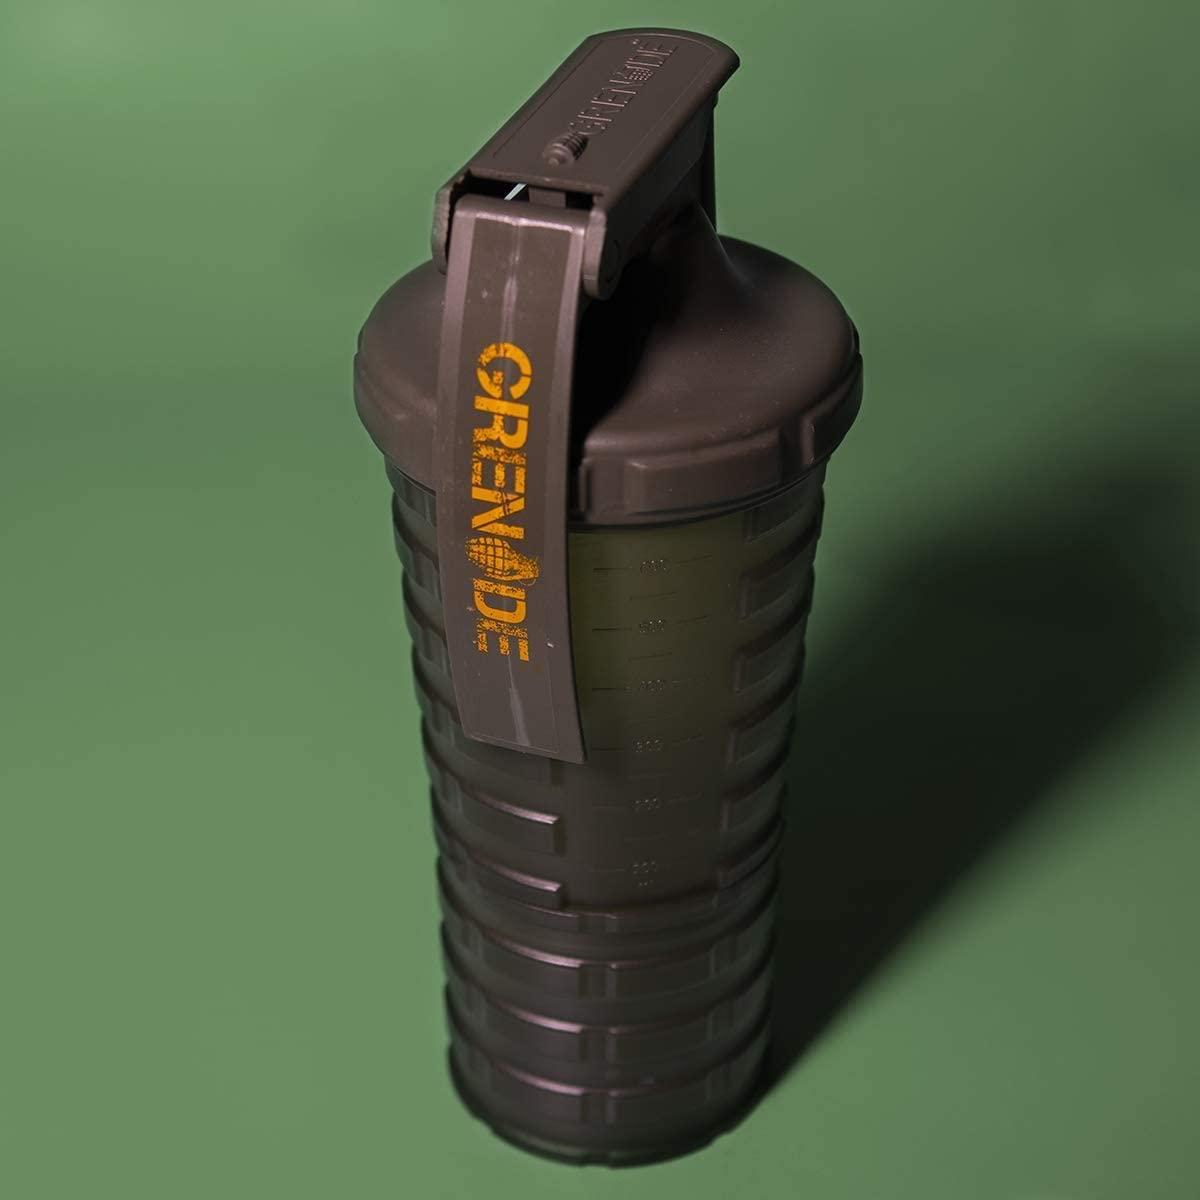 Grenade Protein Powder Shaker Bottle Cup & Removable Storage Compartment  600ml